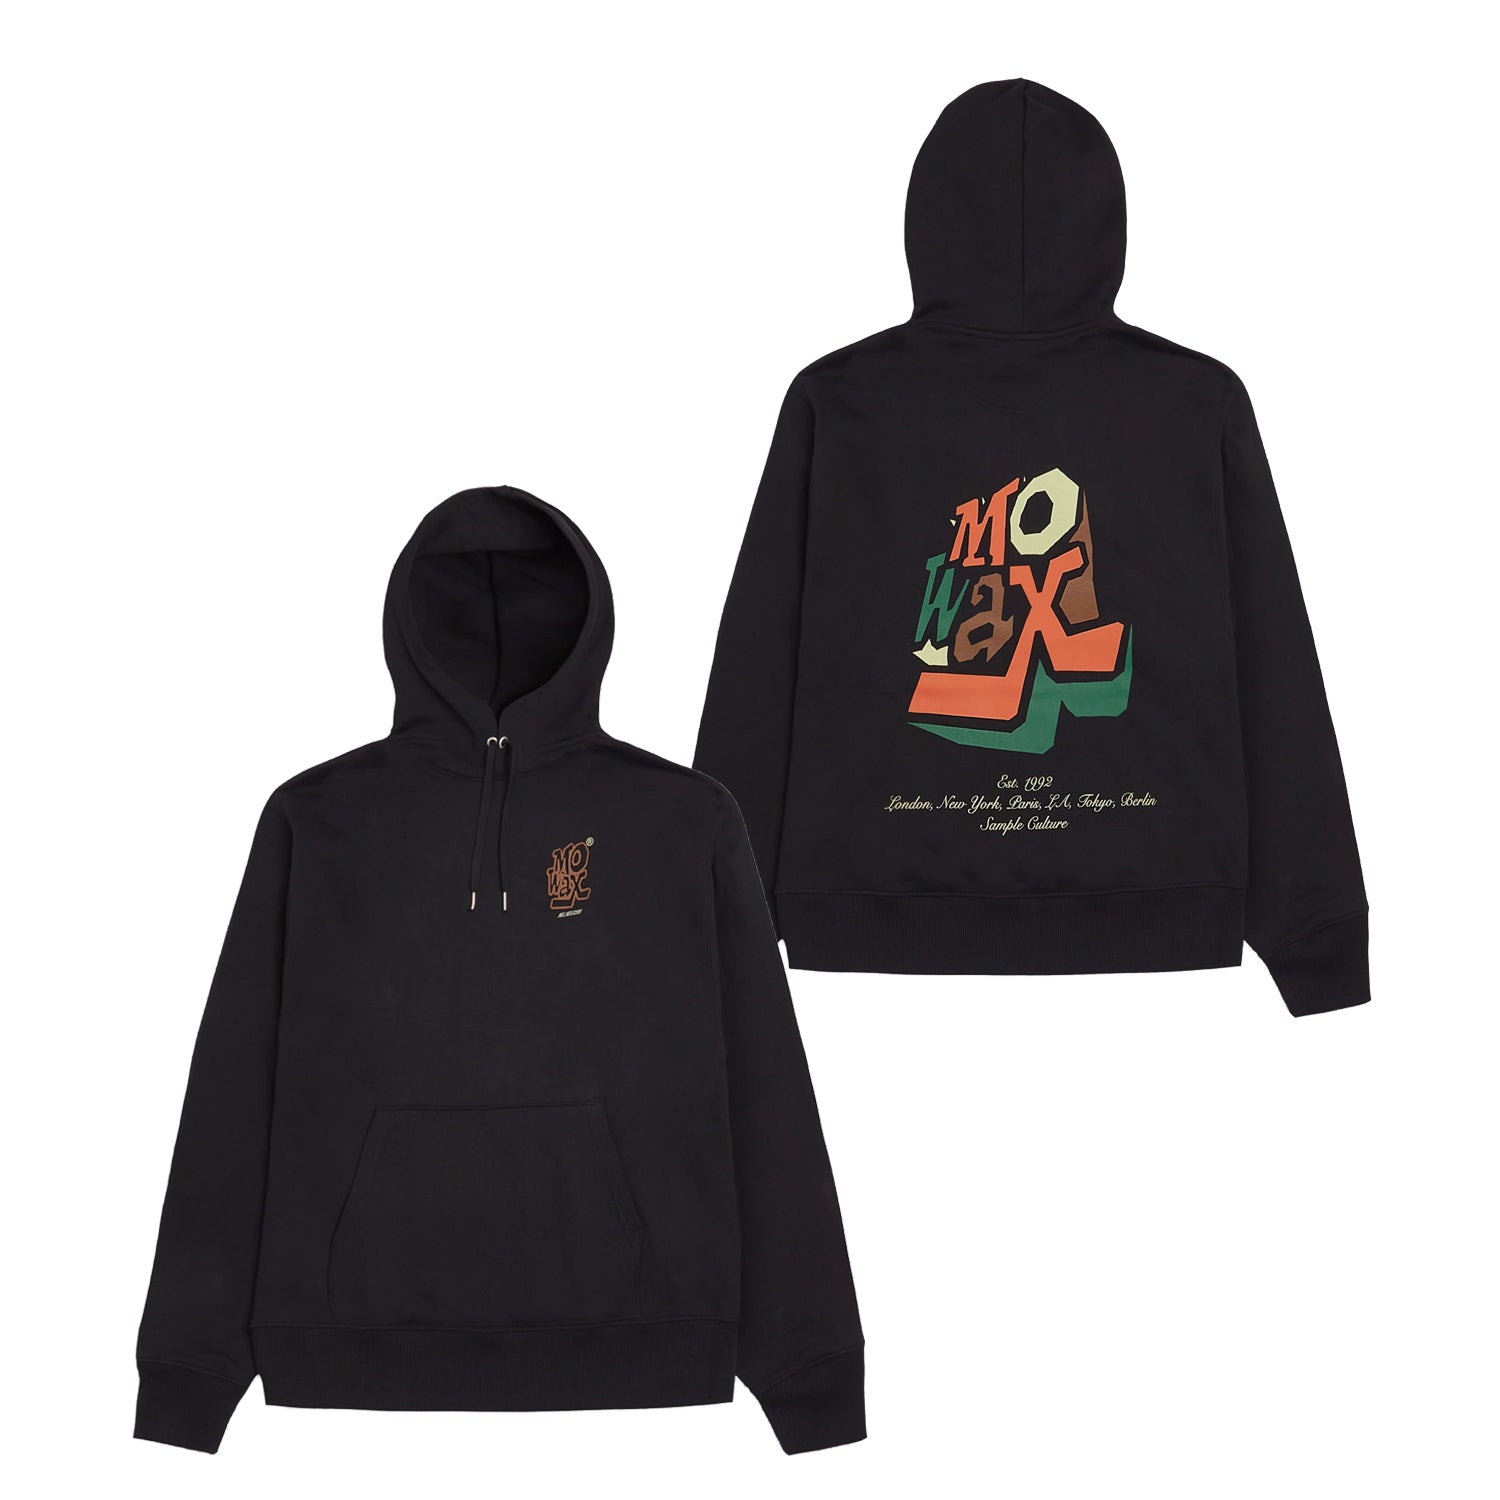 Hoody - Front & Back